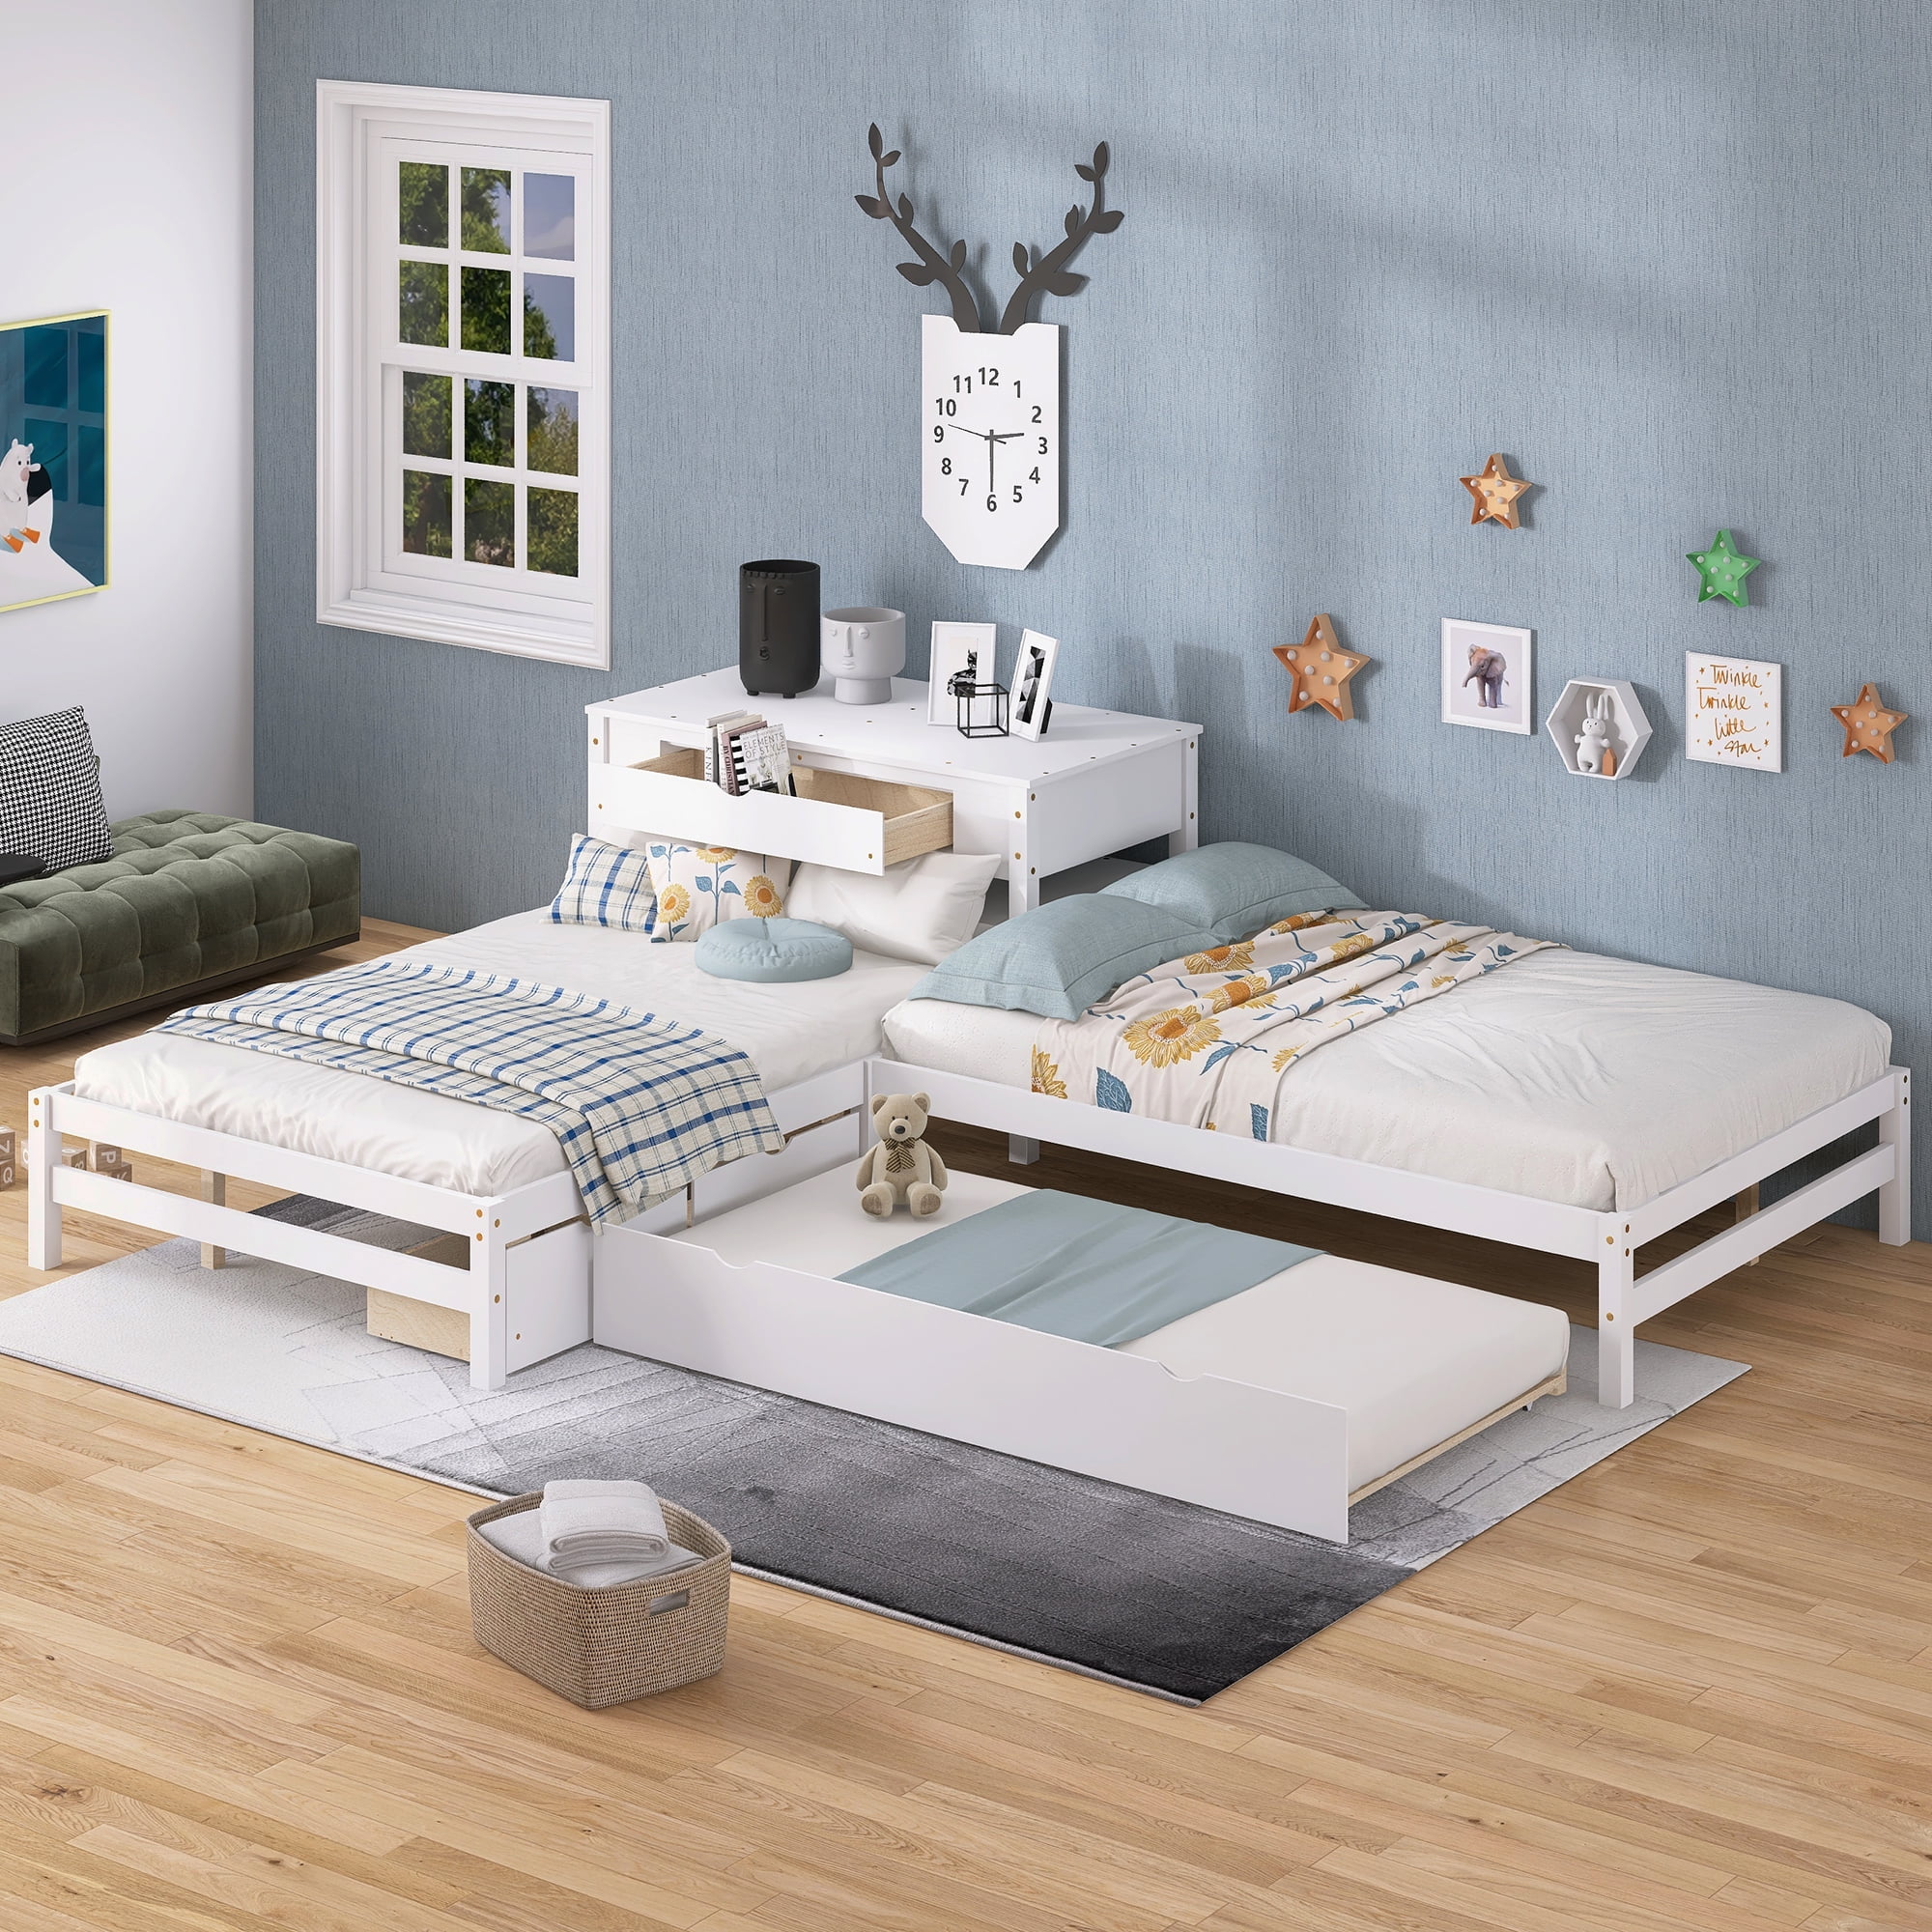 EUROCO Full Size L-Shaped Platform Beds with Trundle for Kids, White ...